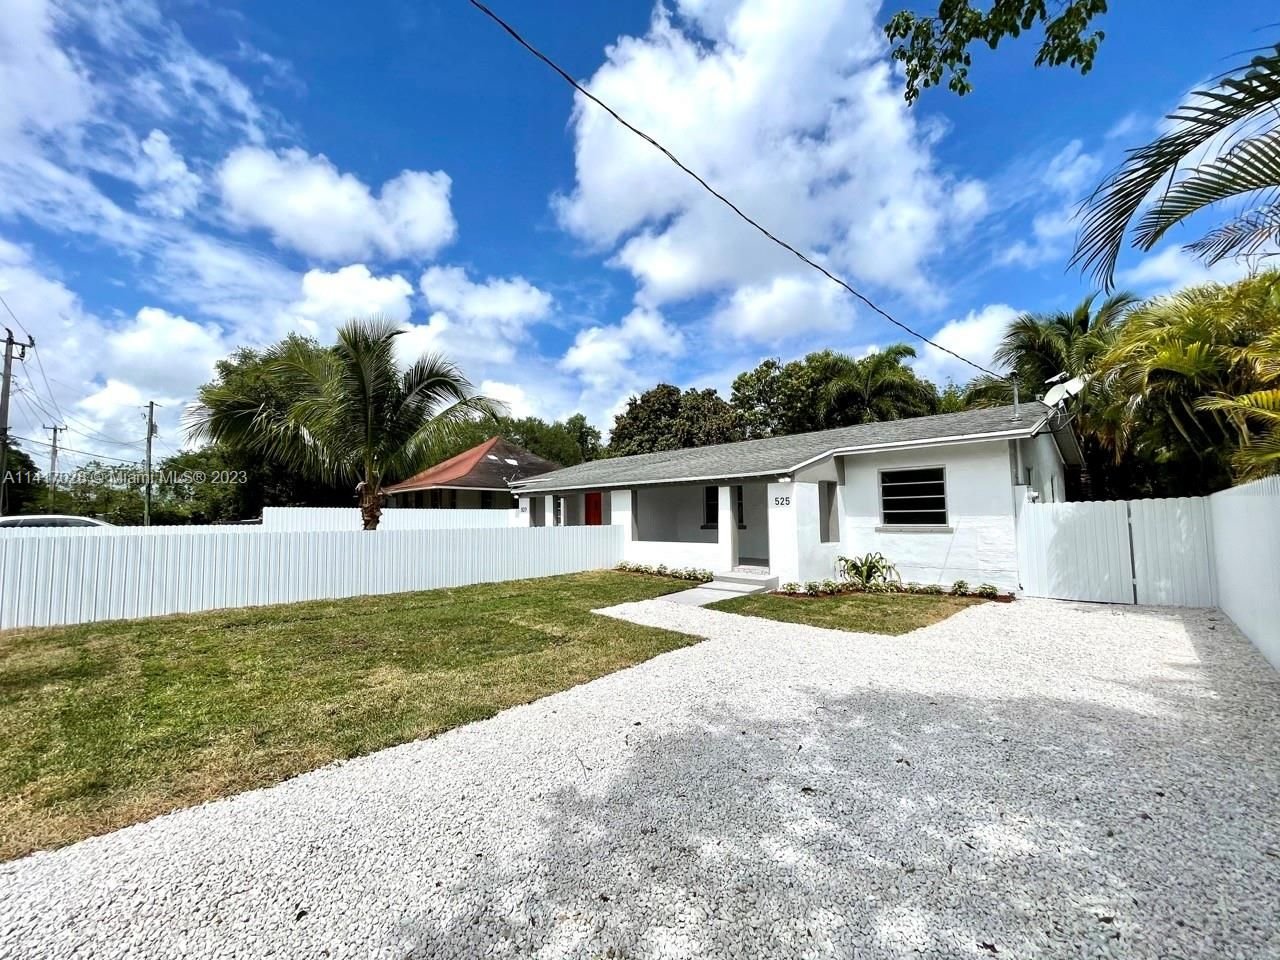 Real estate property located at 525 91st St, Miami-Dade County, PL OF HOME ACRES, Miami, FL